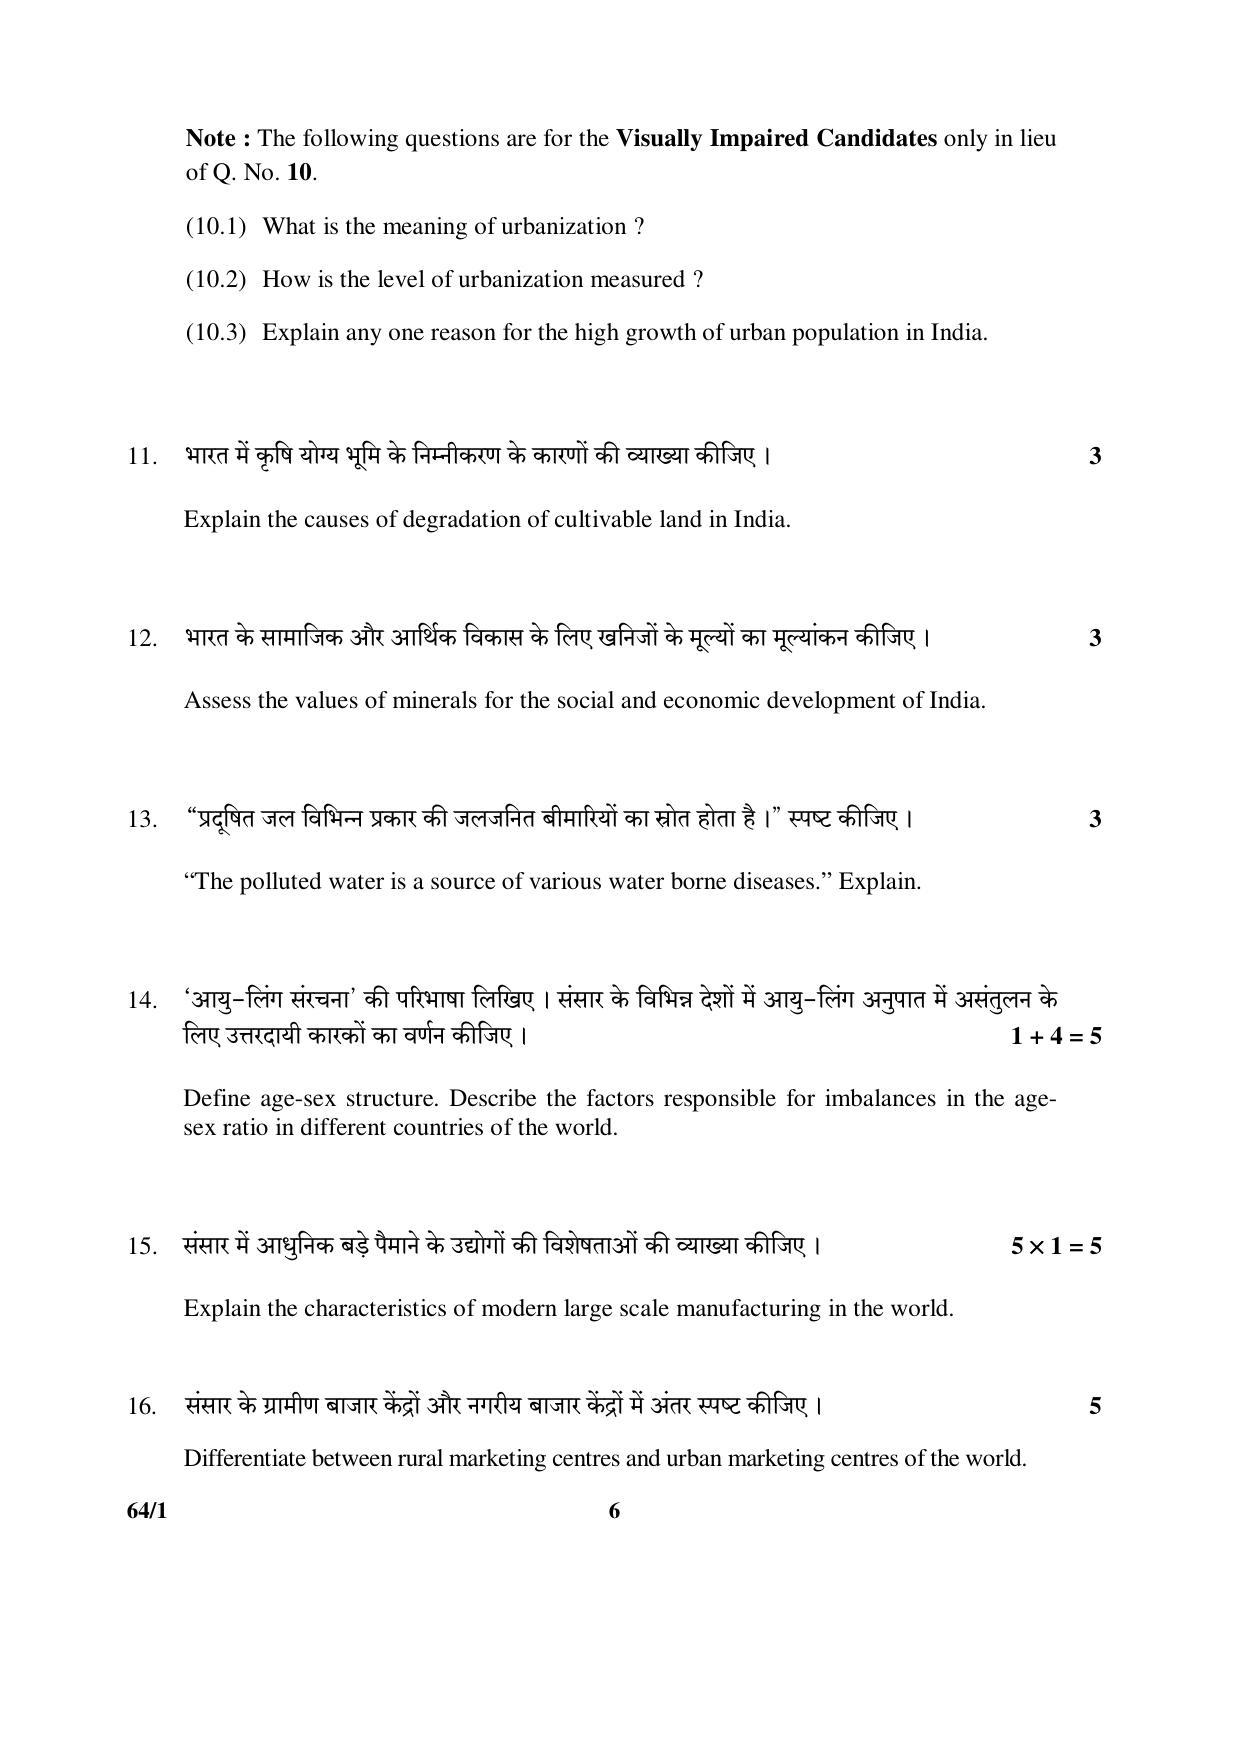 CBSE Class 12 64-1 (Geography) 2017-comptt Question Paper - Page 6